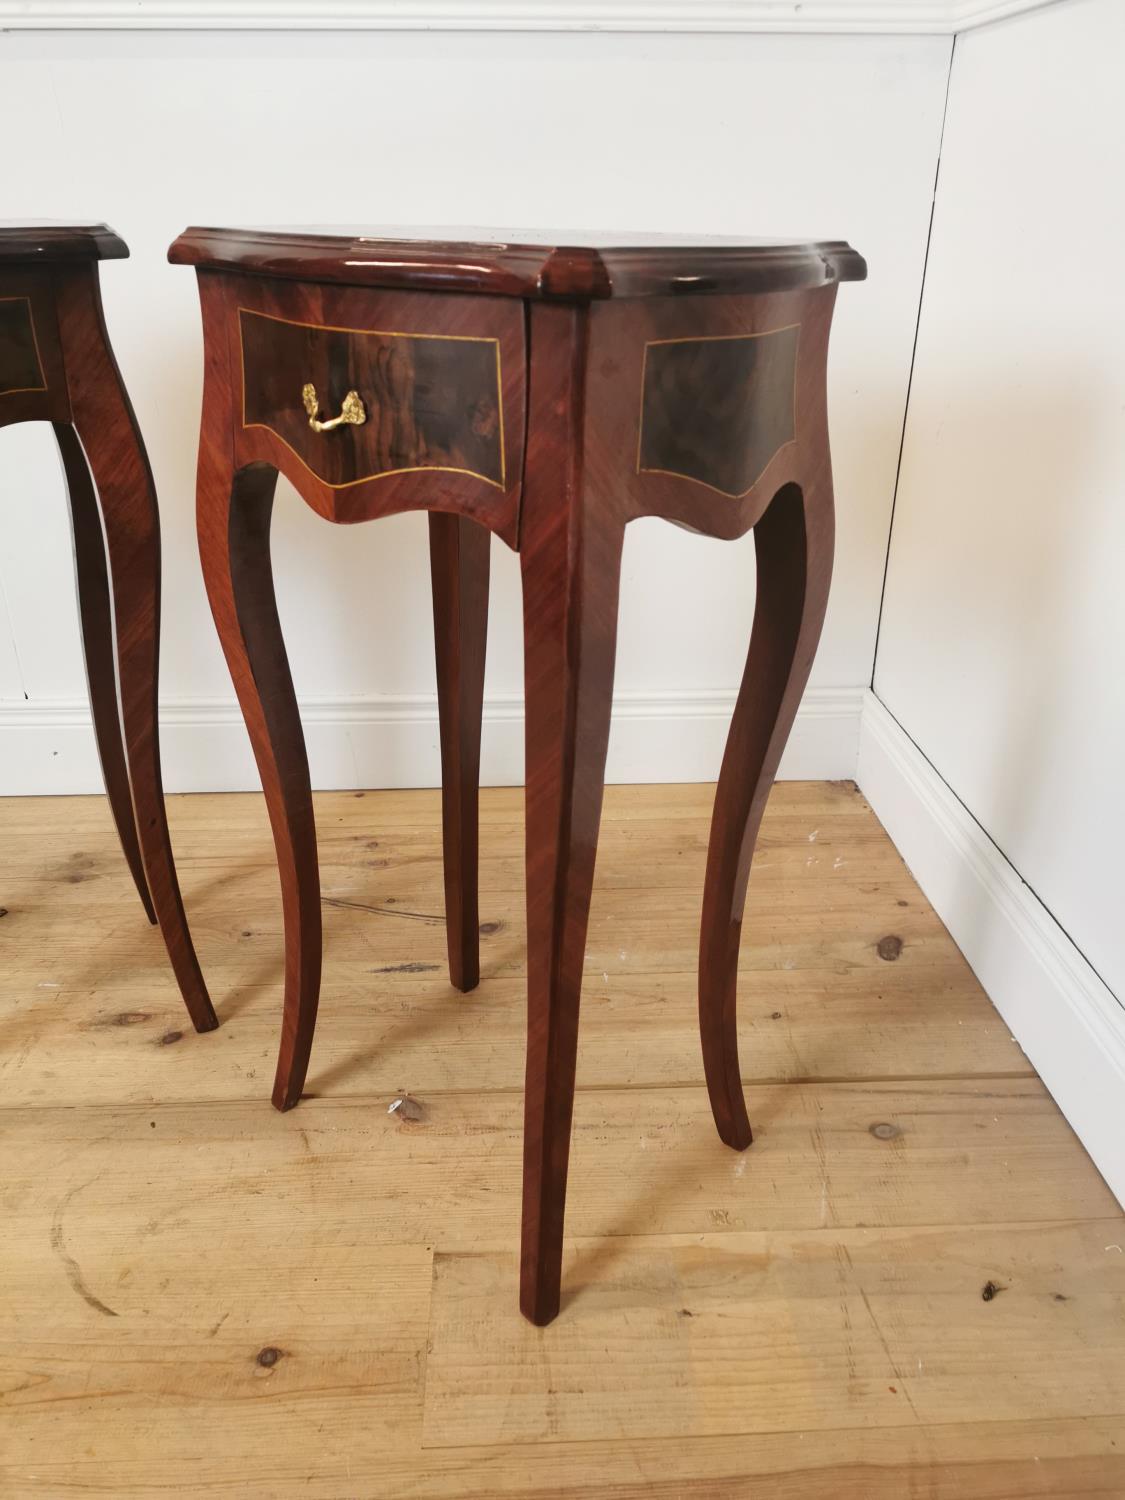 Pair of inlaid kingwood lamp tables - Image 3 of 5